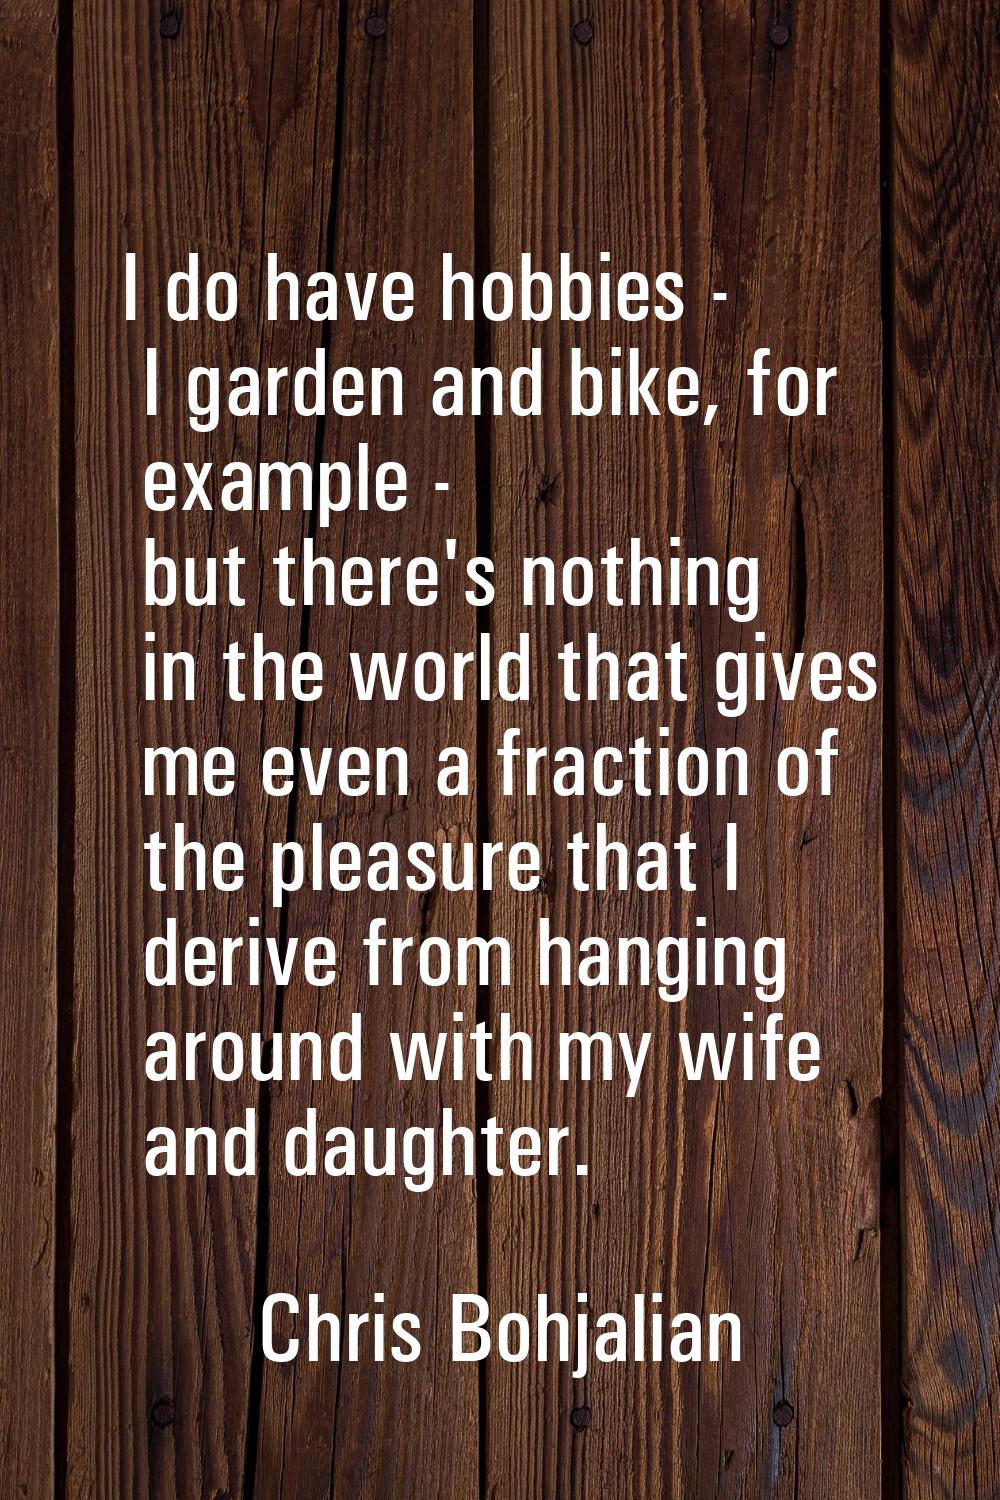 I do have hobbies - I garden and bike, for example - but there's nothing in the world that gives me